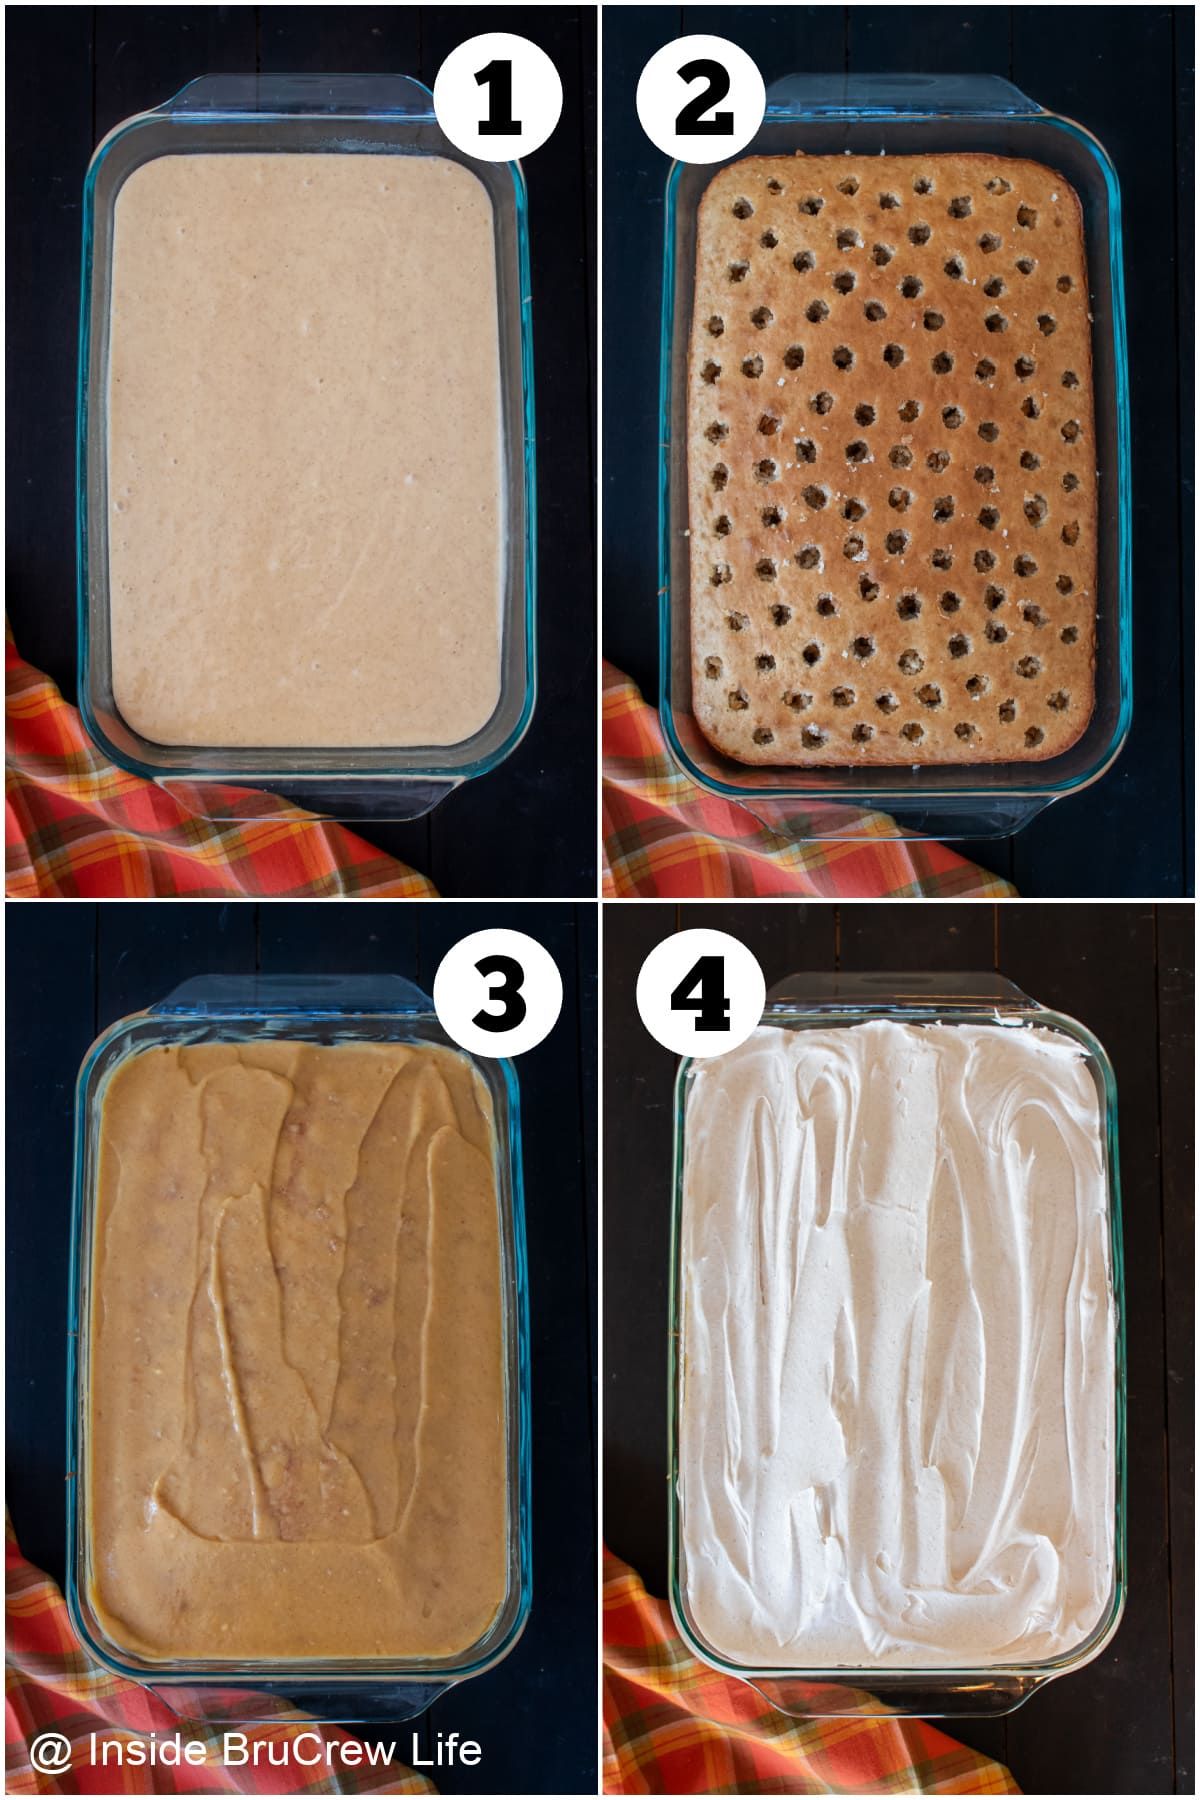 Four pictures collaged together showing how to make a pudding poke cake.